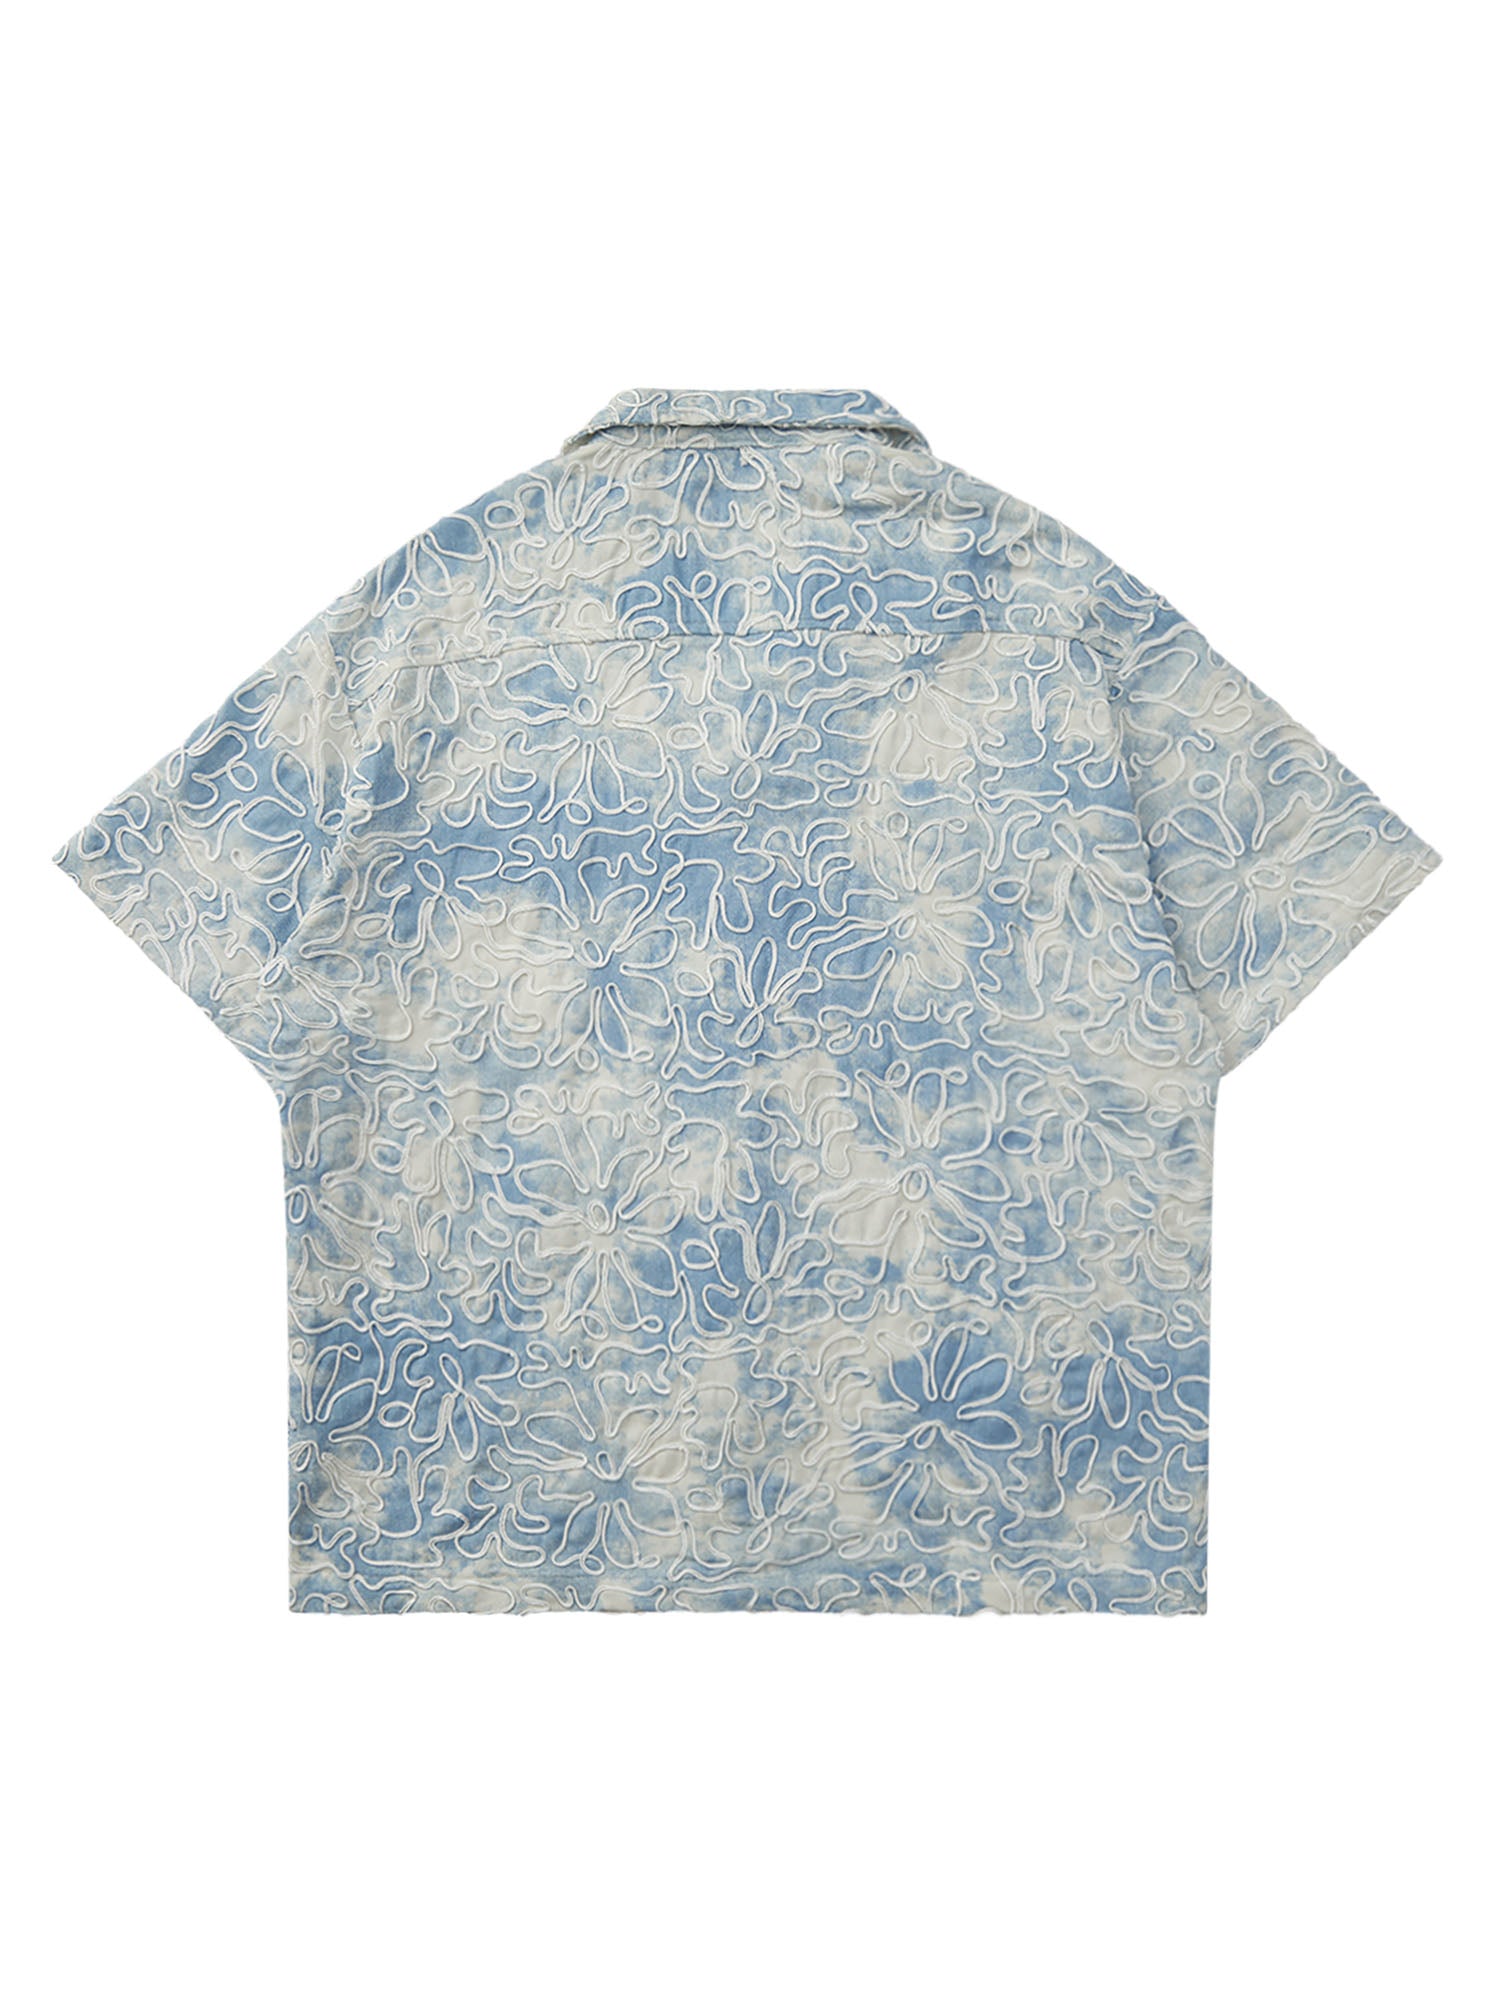 Thesupermade Ink Tie-dye Embroidered Flowers Hip-hop Short-sleeved Shirt